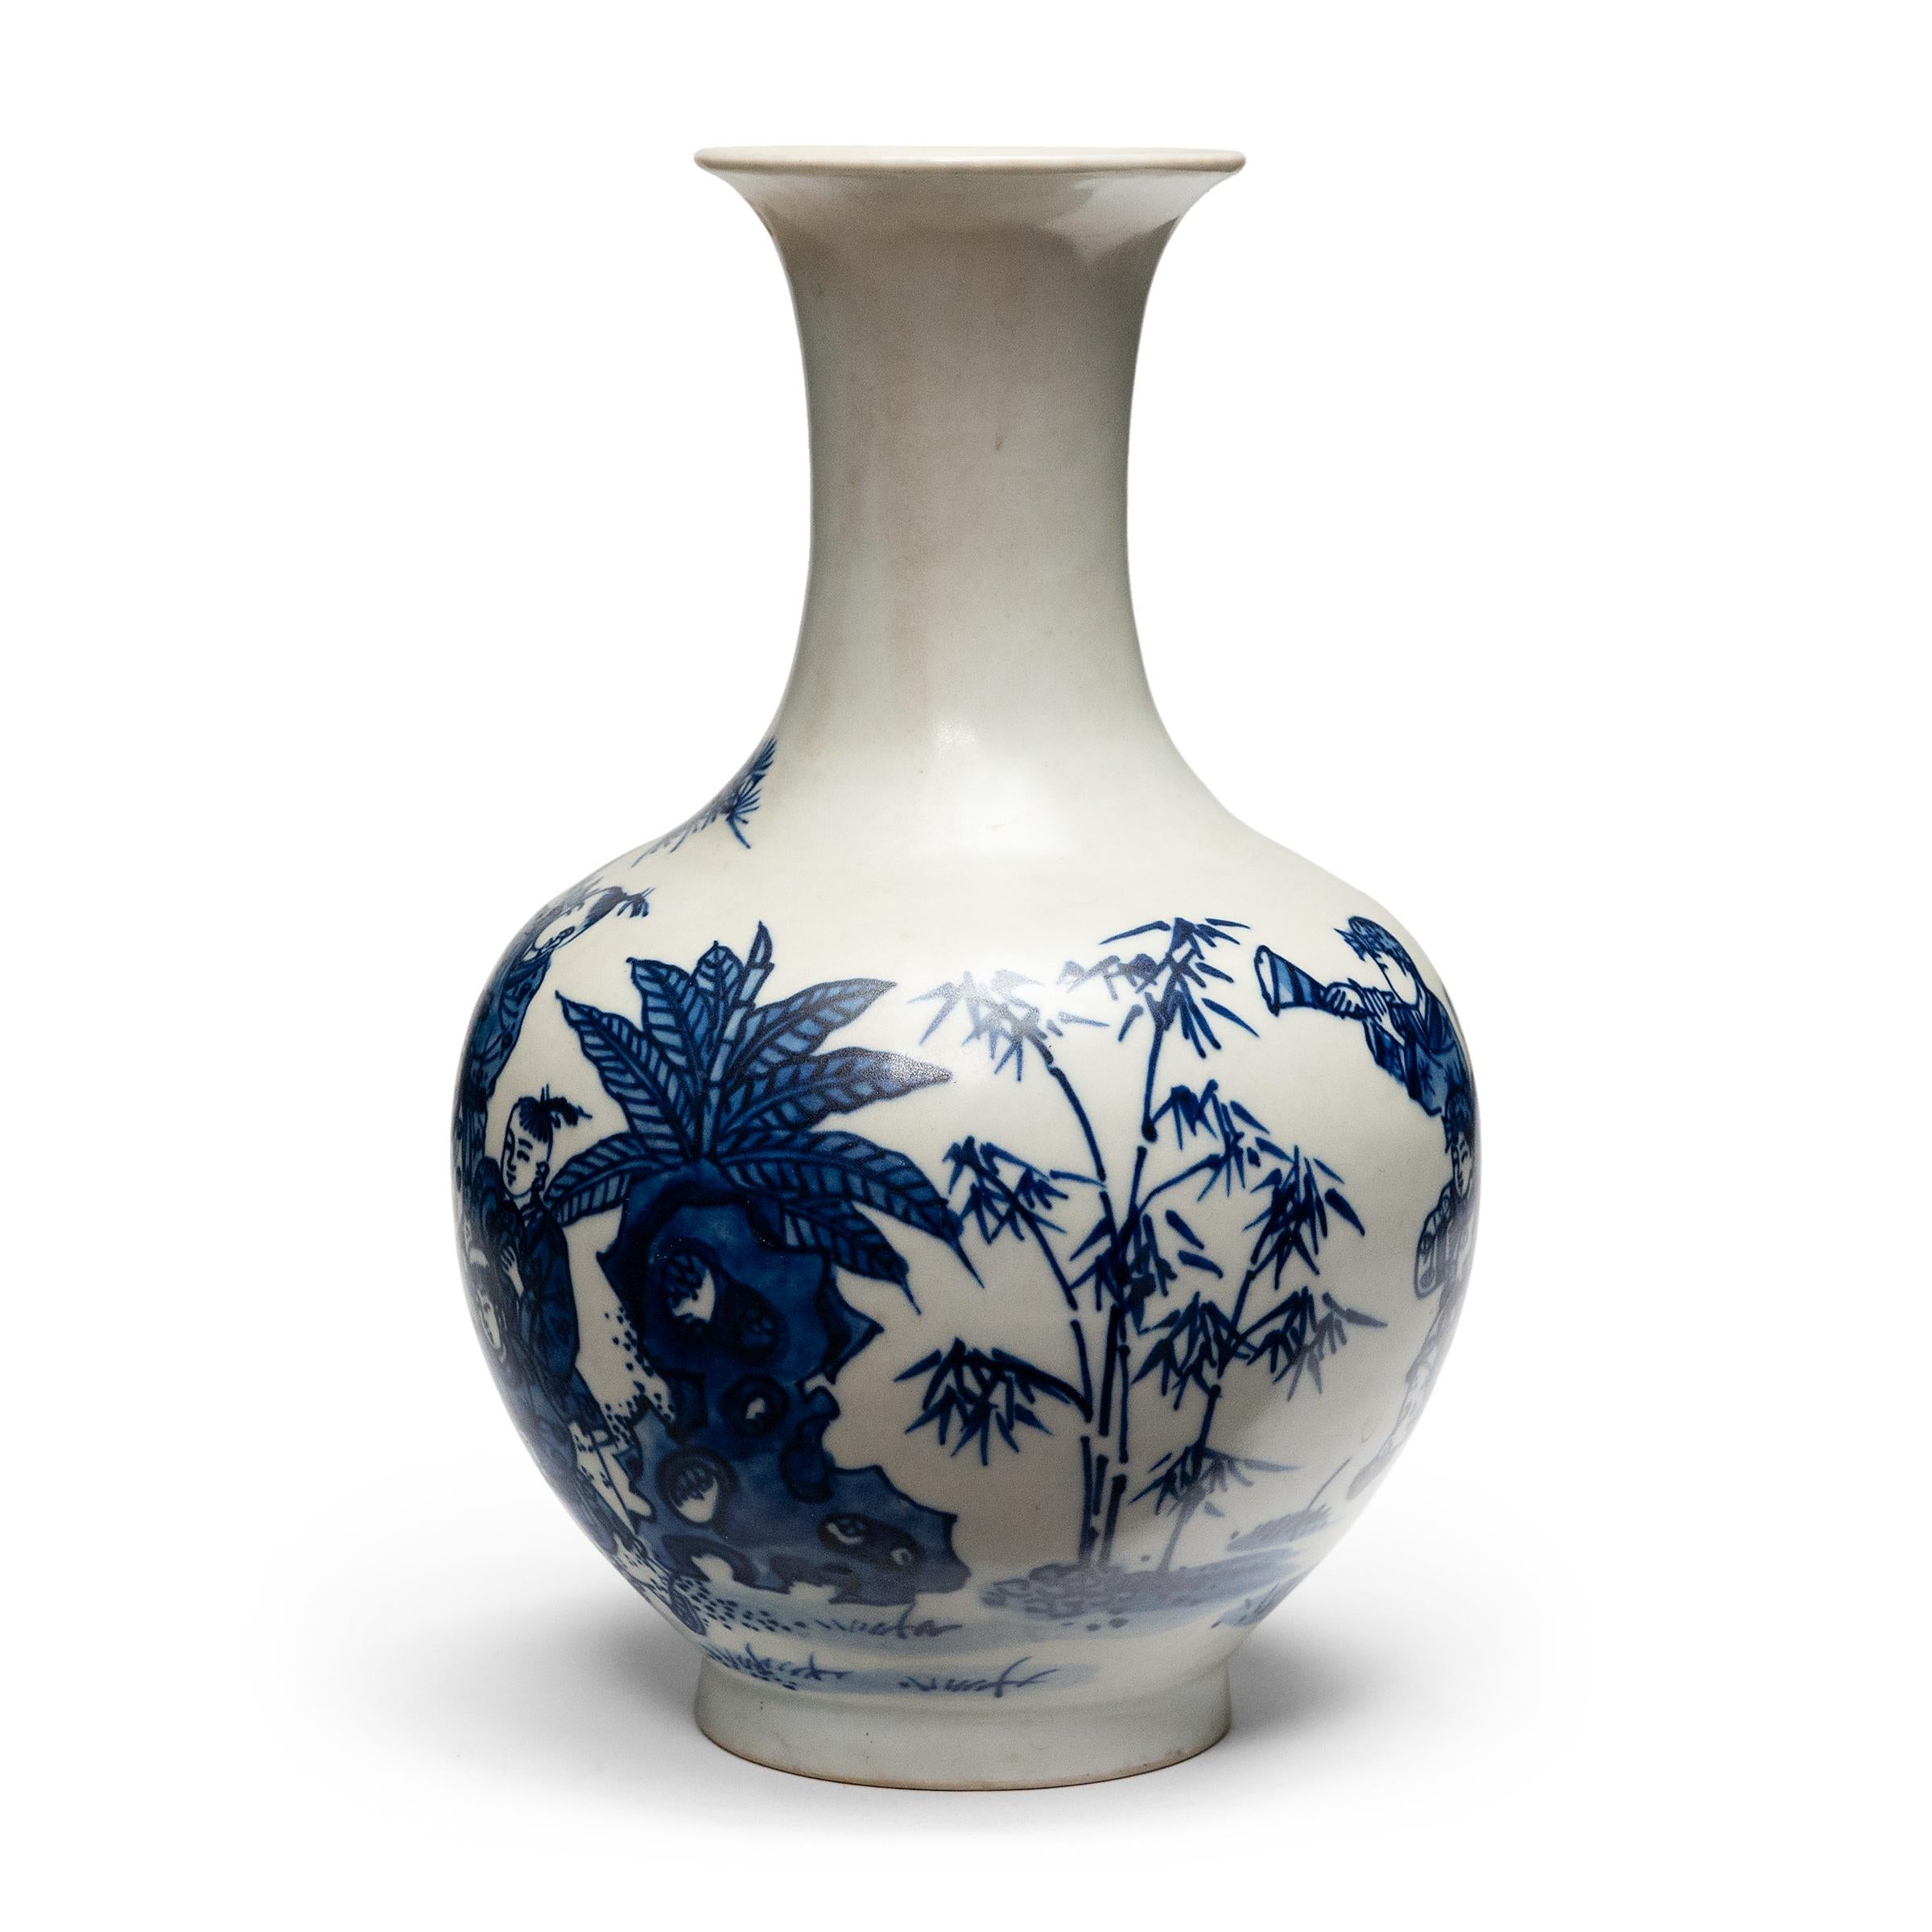 Contrasted by a crisp white field, this small porcelain vase is decorated in the timeless blue-and-white style with bold brushwork and deep cobalt-blue color. The gracefully curved form is a traditional vase shape known as a yuhuchunping or